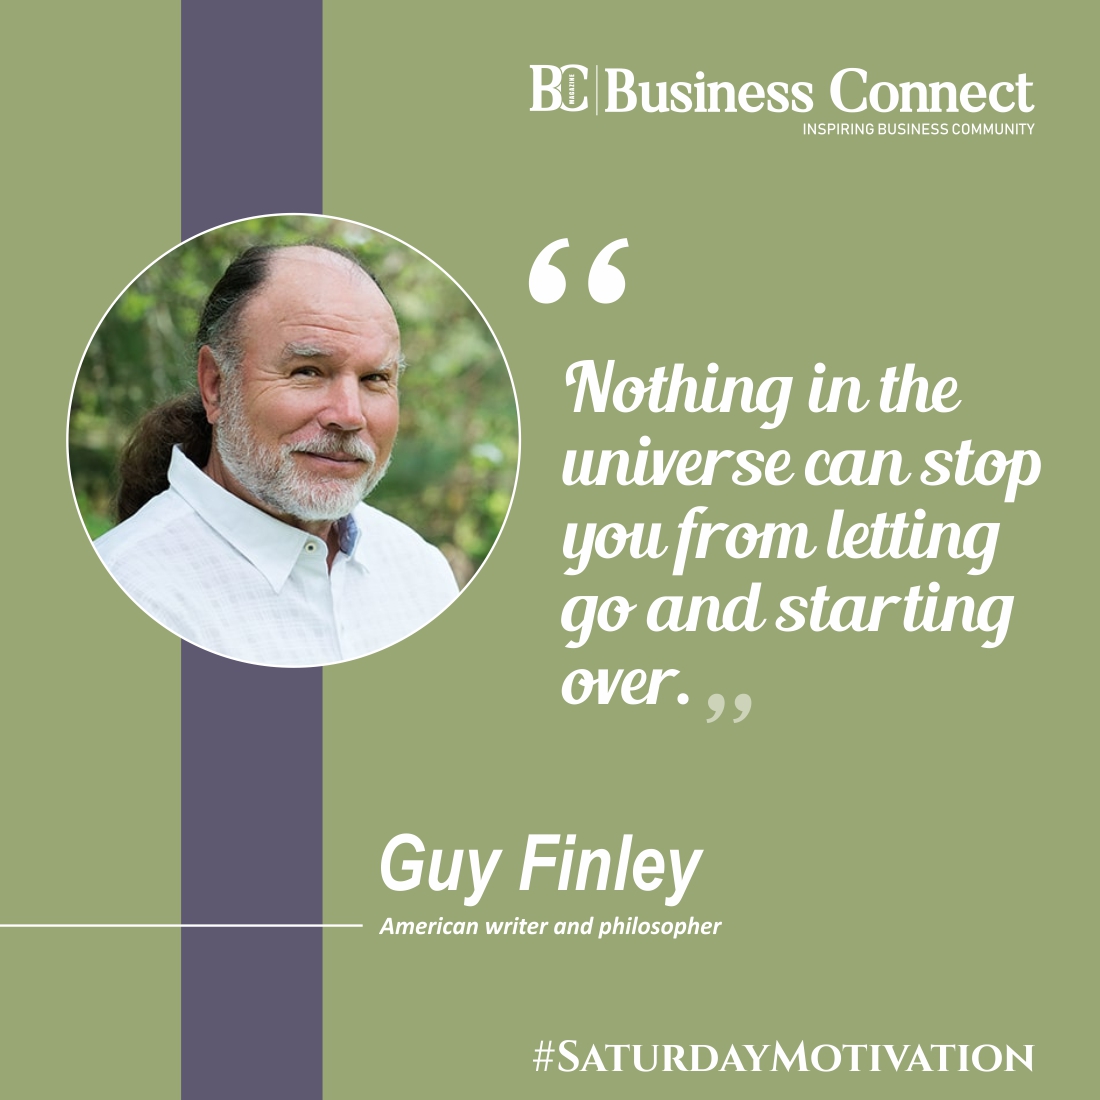 “Nothing in the universe can stop you from letting go and starting over.”- Guy Finley
#GuyFinley #quotes #quote #morningvibe #saturday #success #quotesoftheday #motivationdaily #positivevibes #positivequote #inspirationalquotes #dailymotivationalquotes #morningquotes #motivation